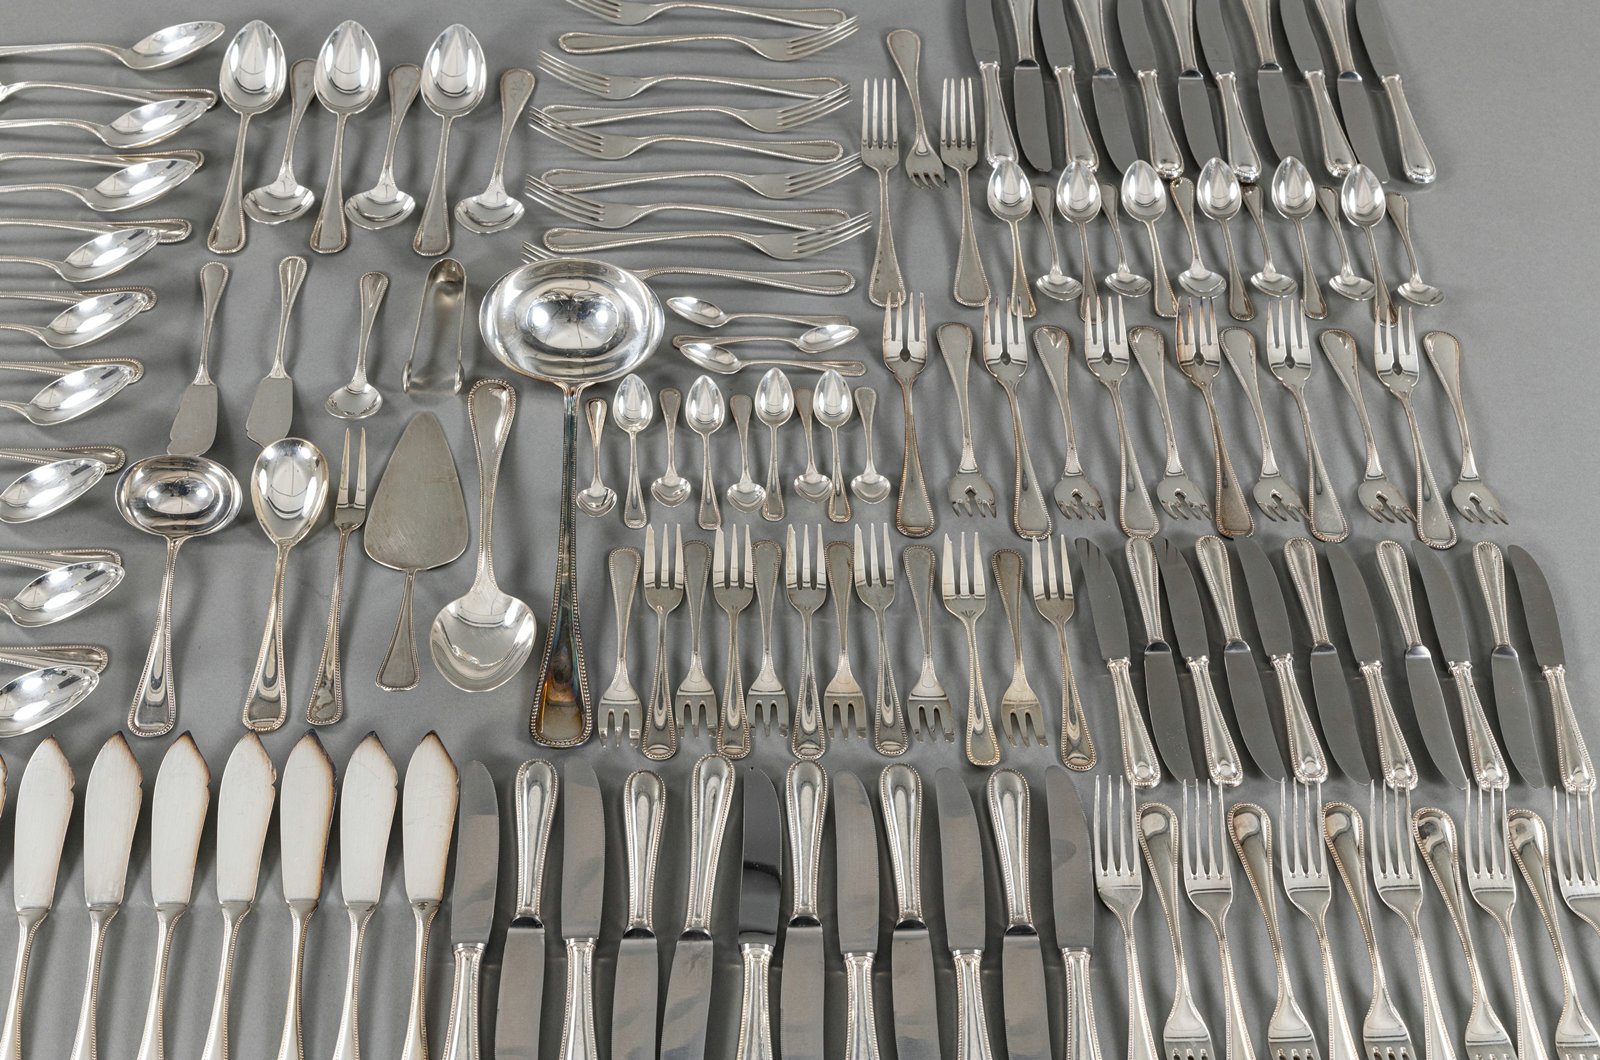 A SILVER CUTLERY FOR MOSTLY 11-12 PEOPLE - Image 4 of 12